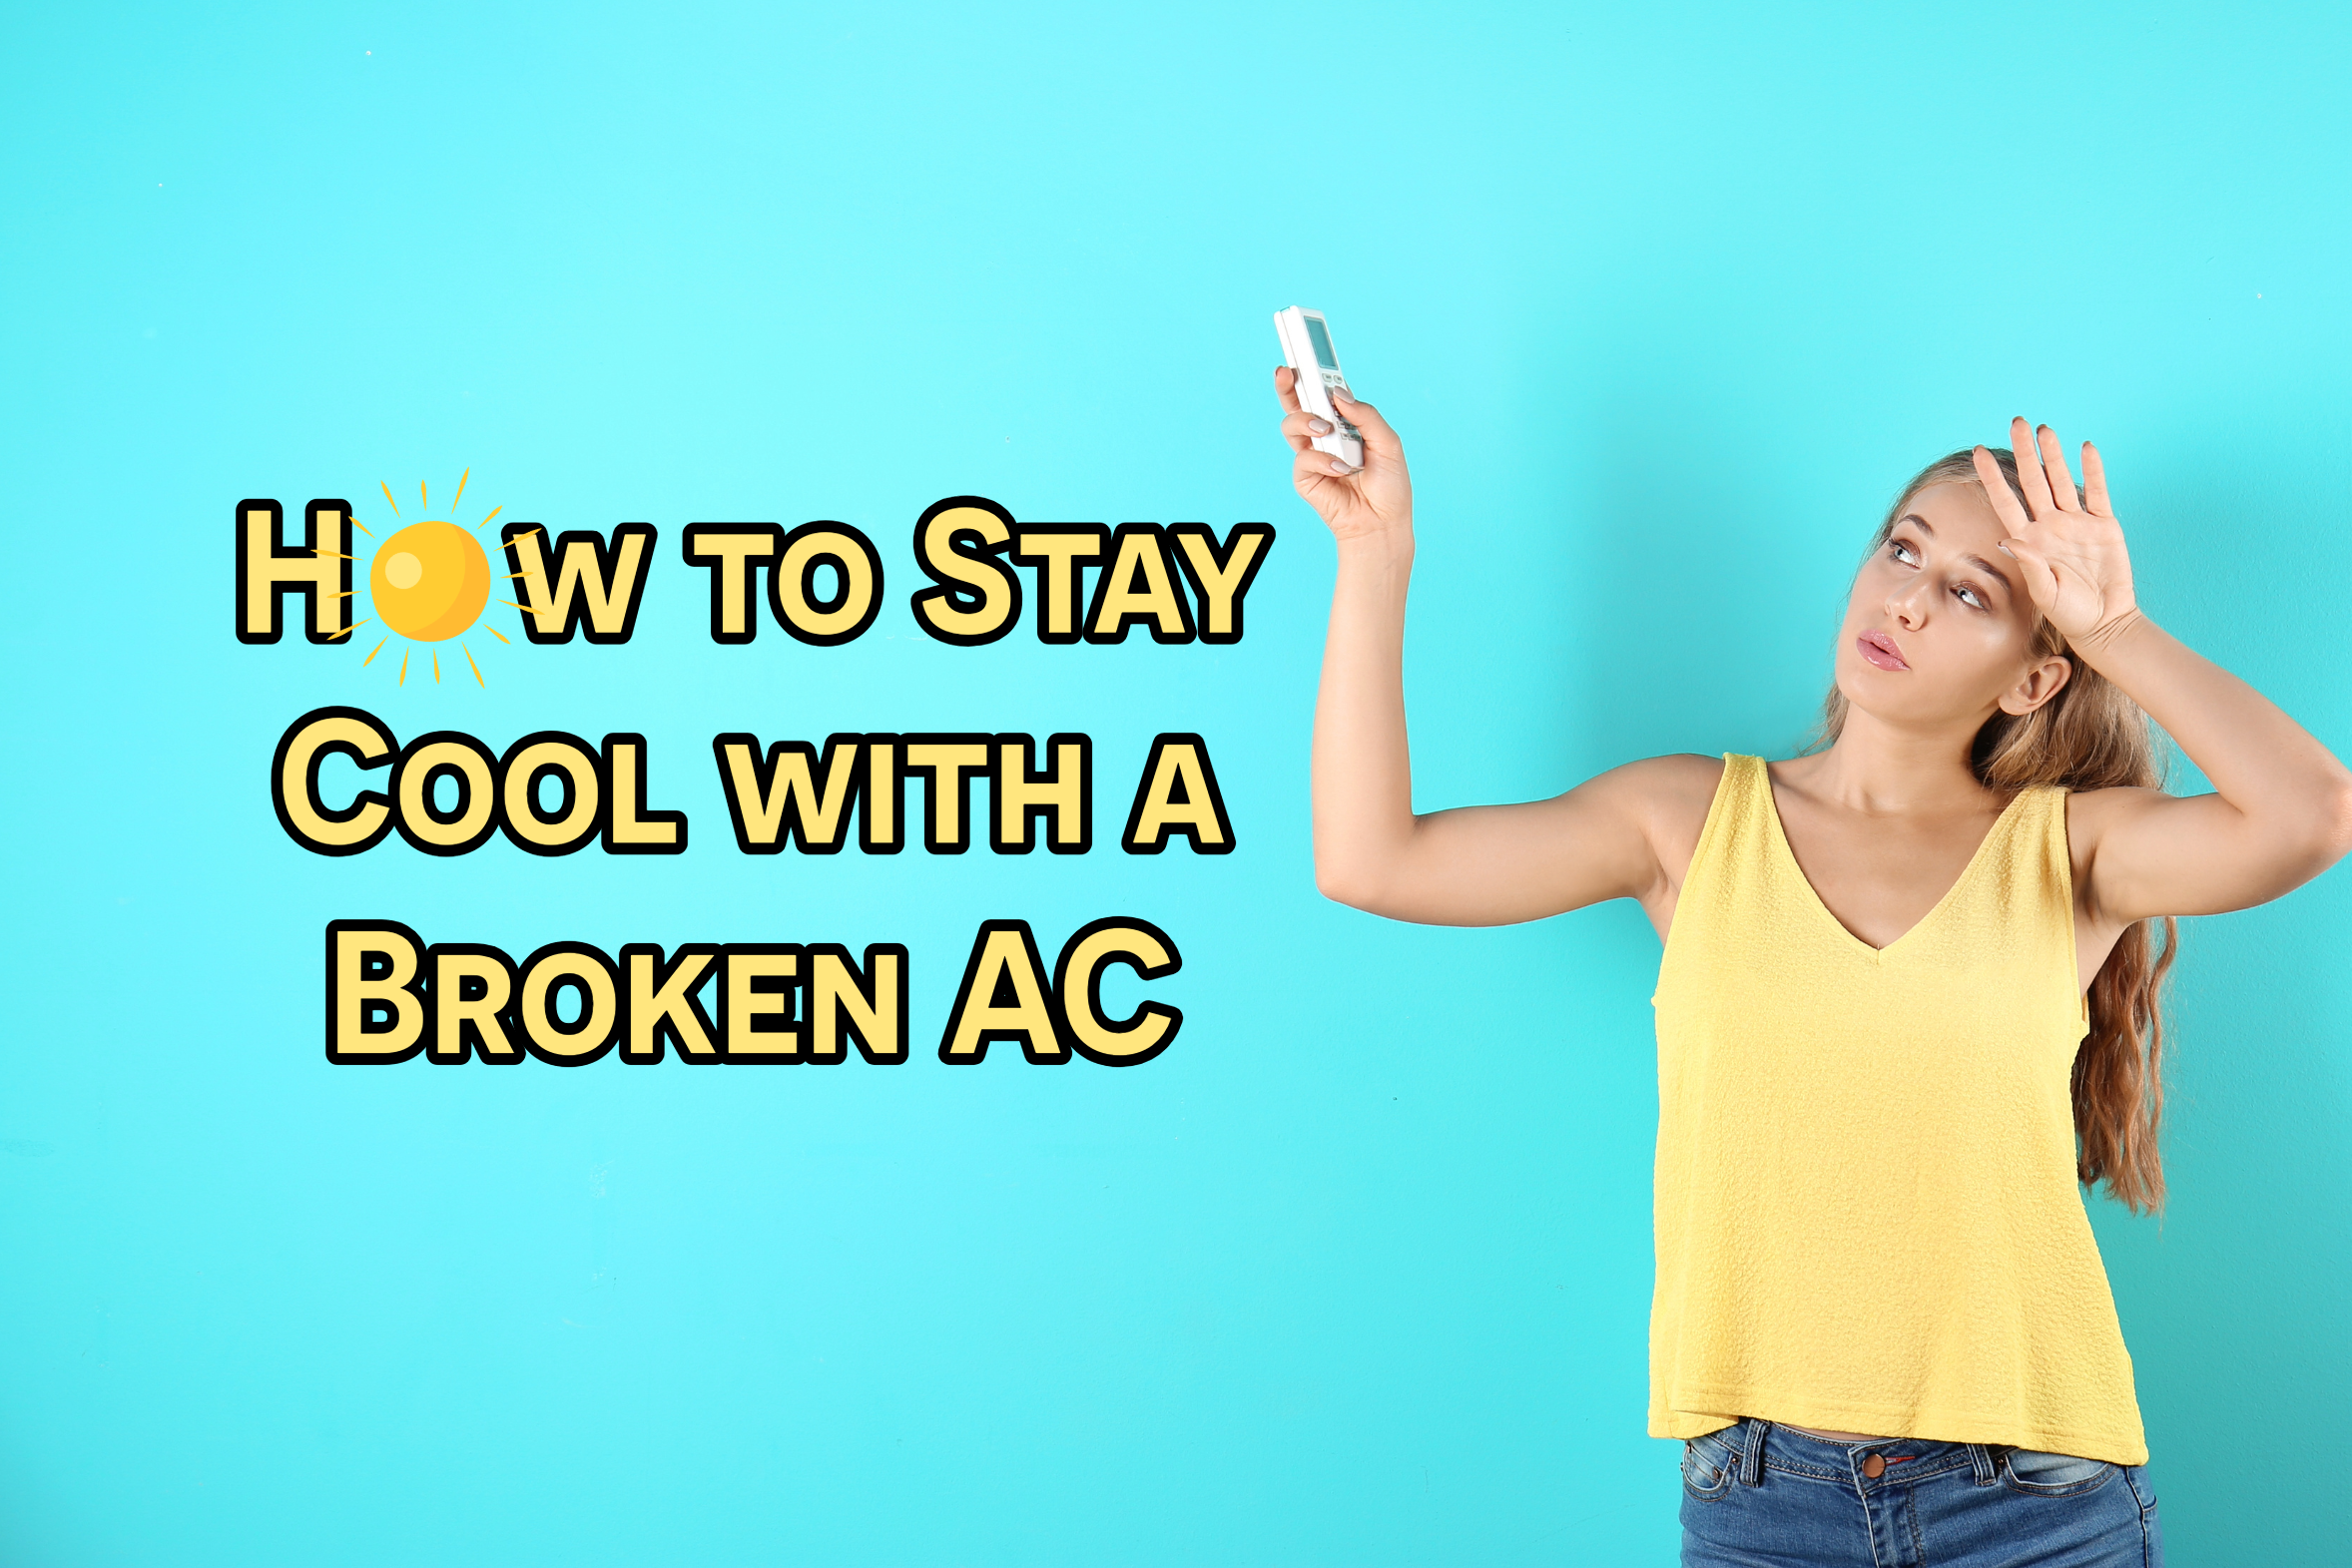 HVAC blog on how to stay cool with a broken AC.